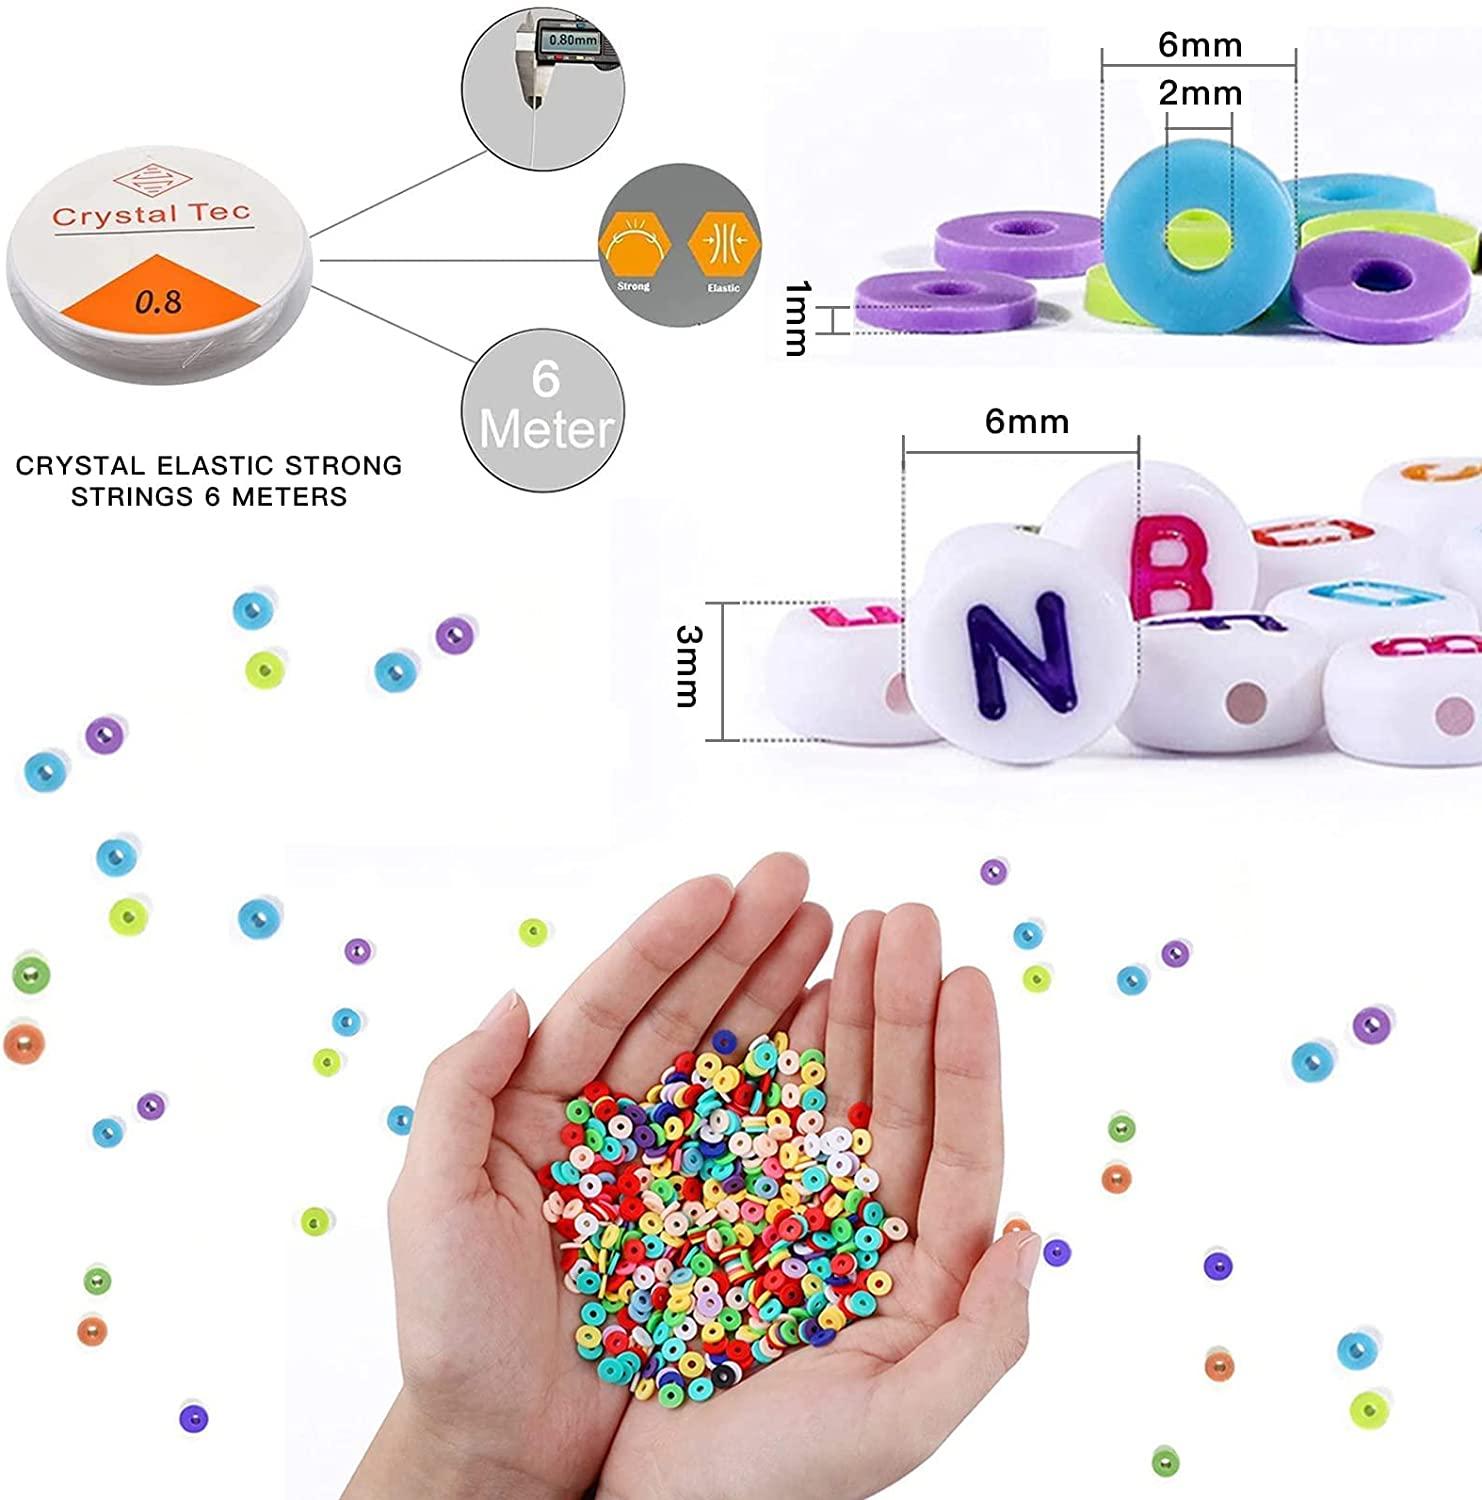 Hot Selling Colorful Loose Beads 4mm Plastic Glass Jewelry Making For Bracelet Necklace Clay Bead Letter Bead Kit DIY Toy 1600603971664